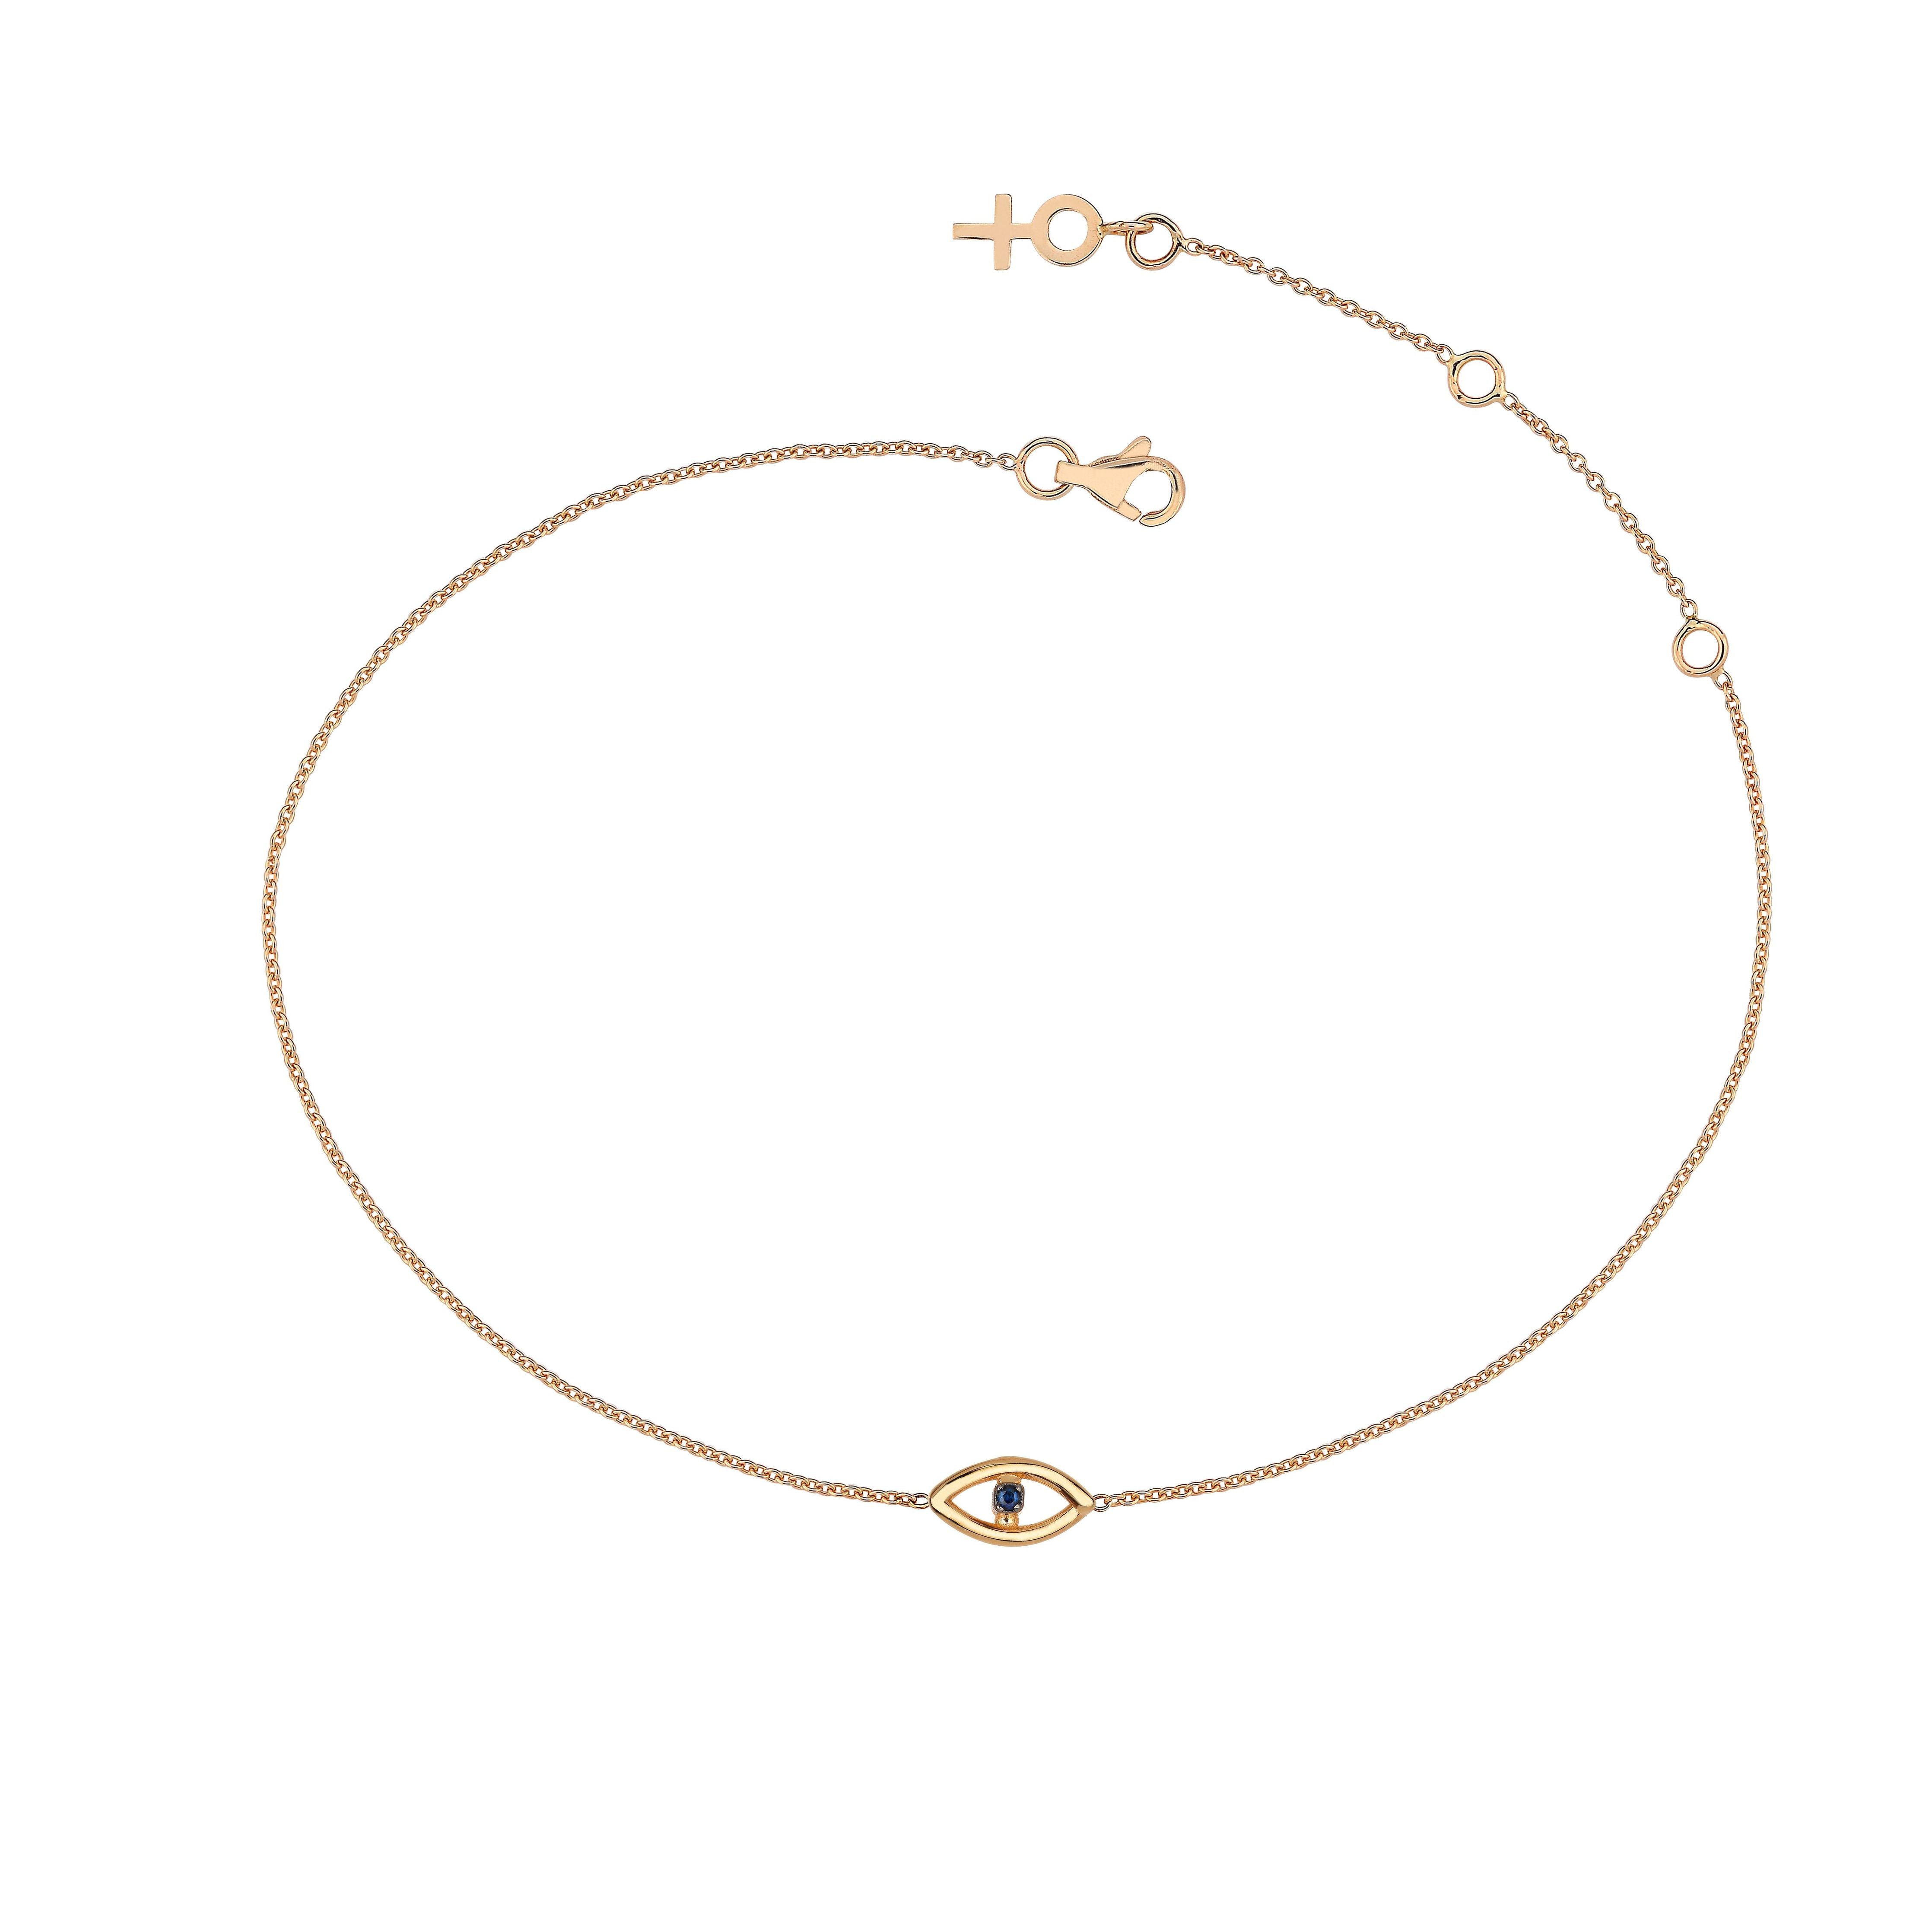 Mini Pure Magic Knot Bracelet in Rose Gold - Her Story Shop